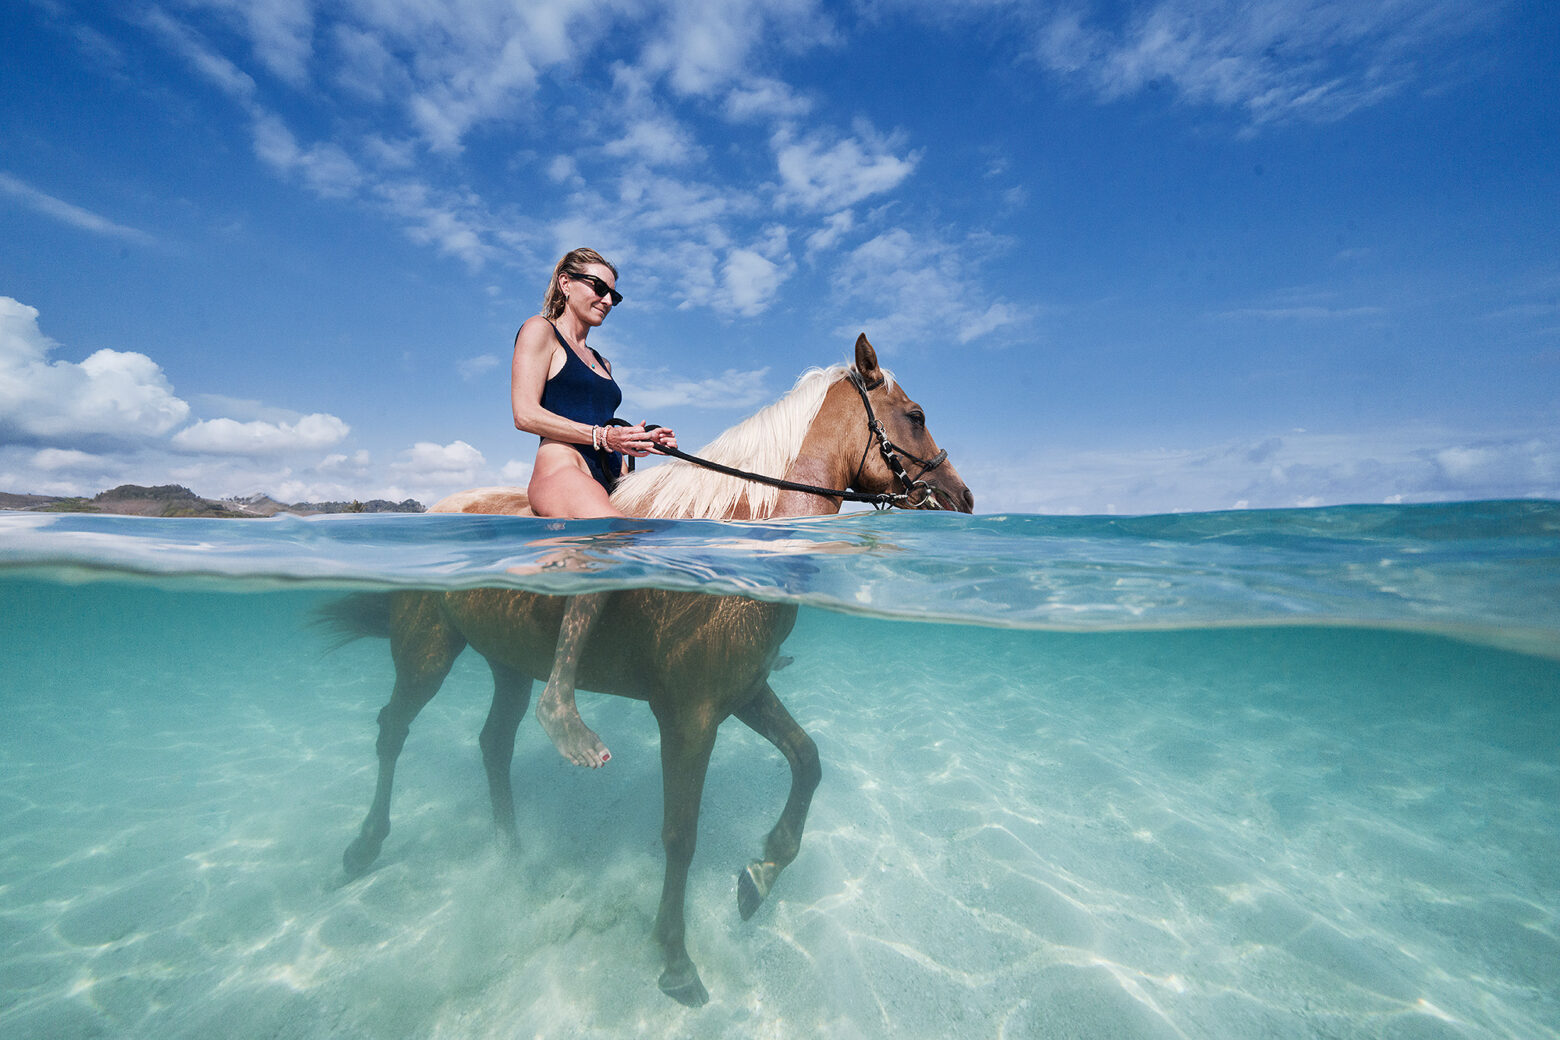 There's a big equestrian culture here. Riding on the beach is a daily thing